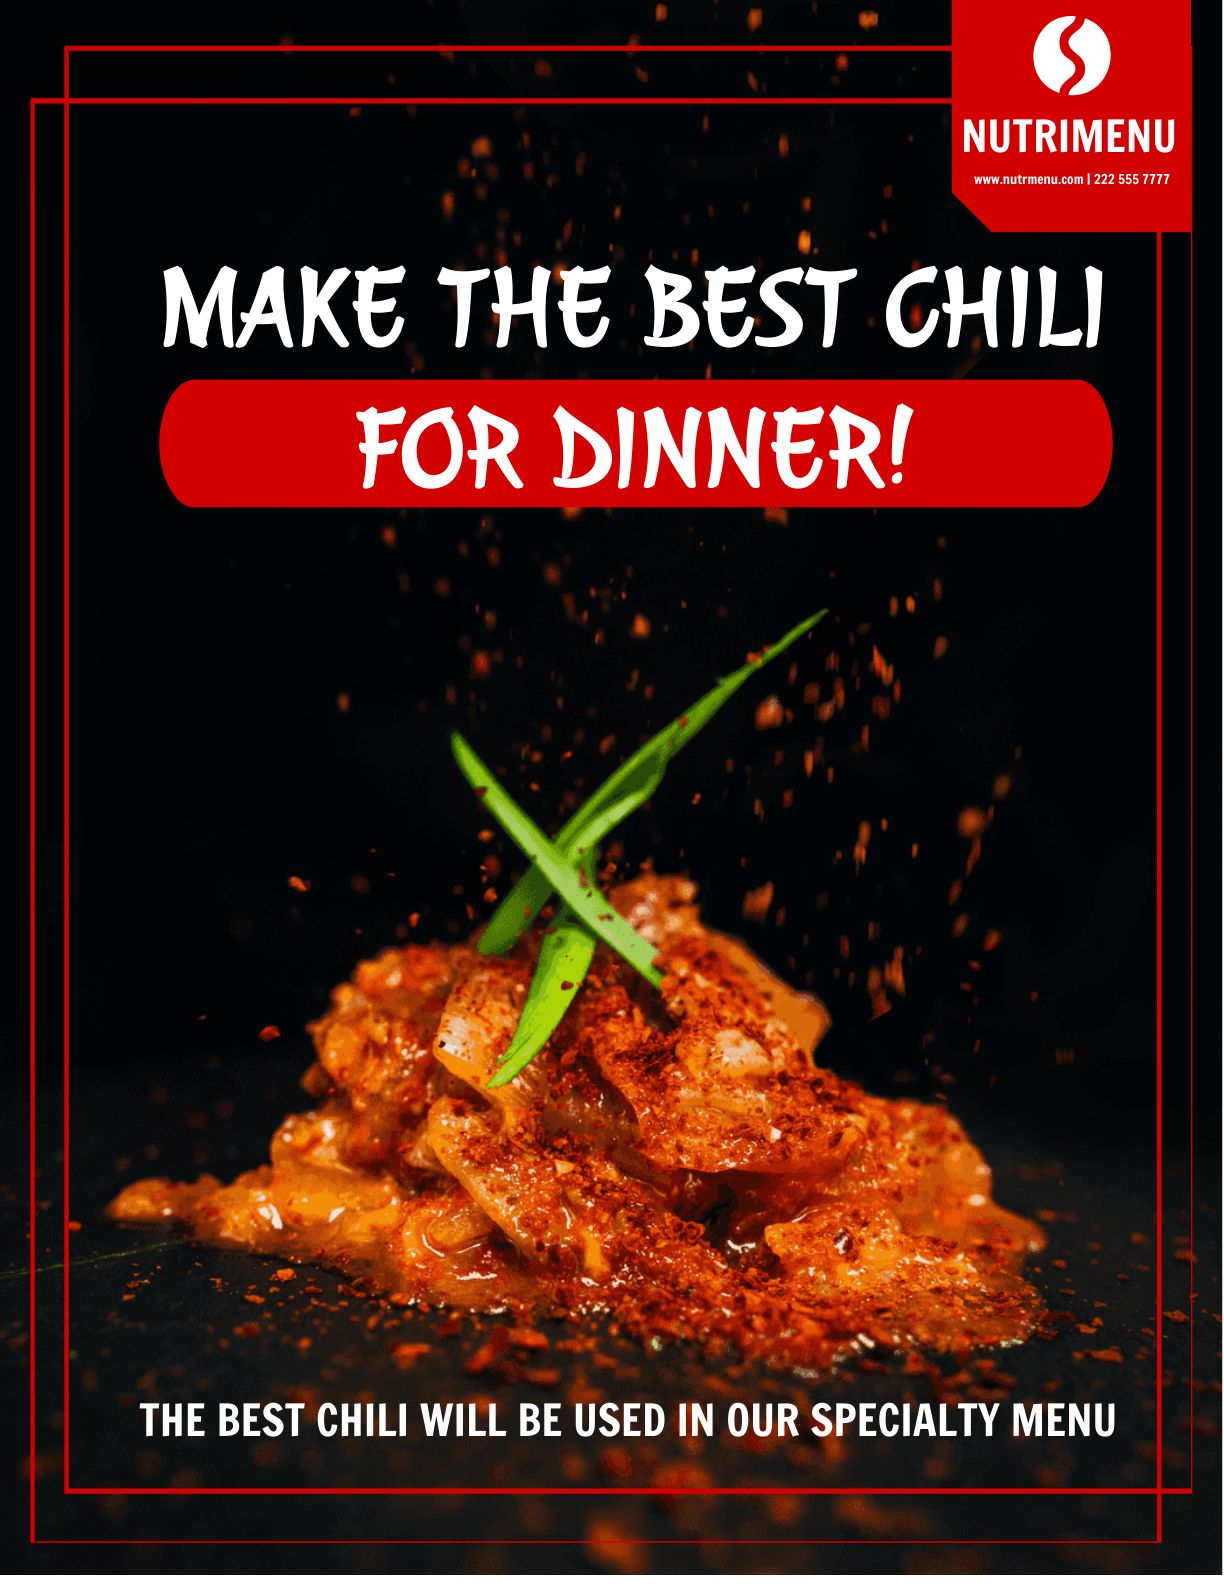 Chili cook off dinner flyer in Word, Google Docs, Illustrator, PSD, Apple Pages, Publisher